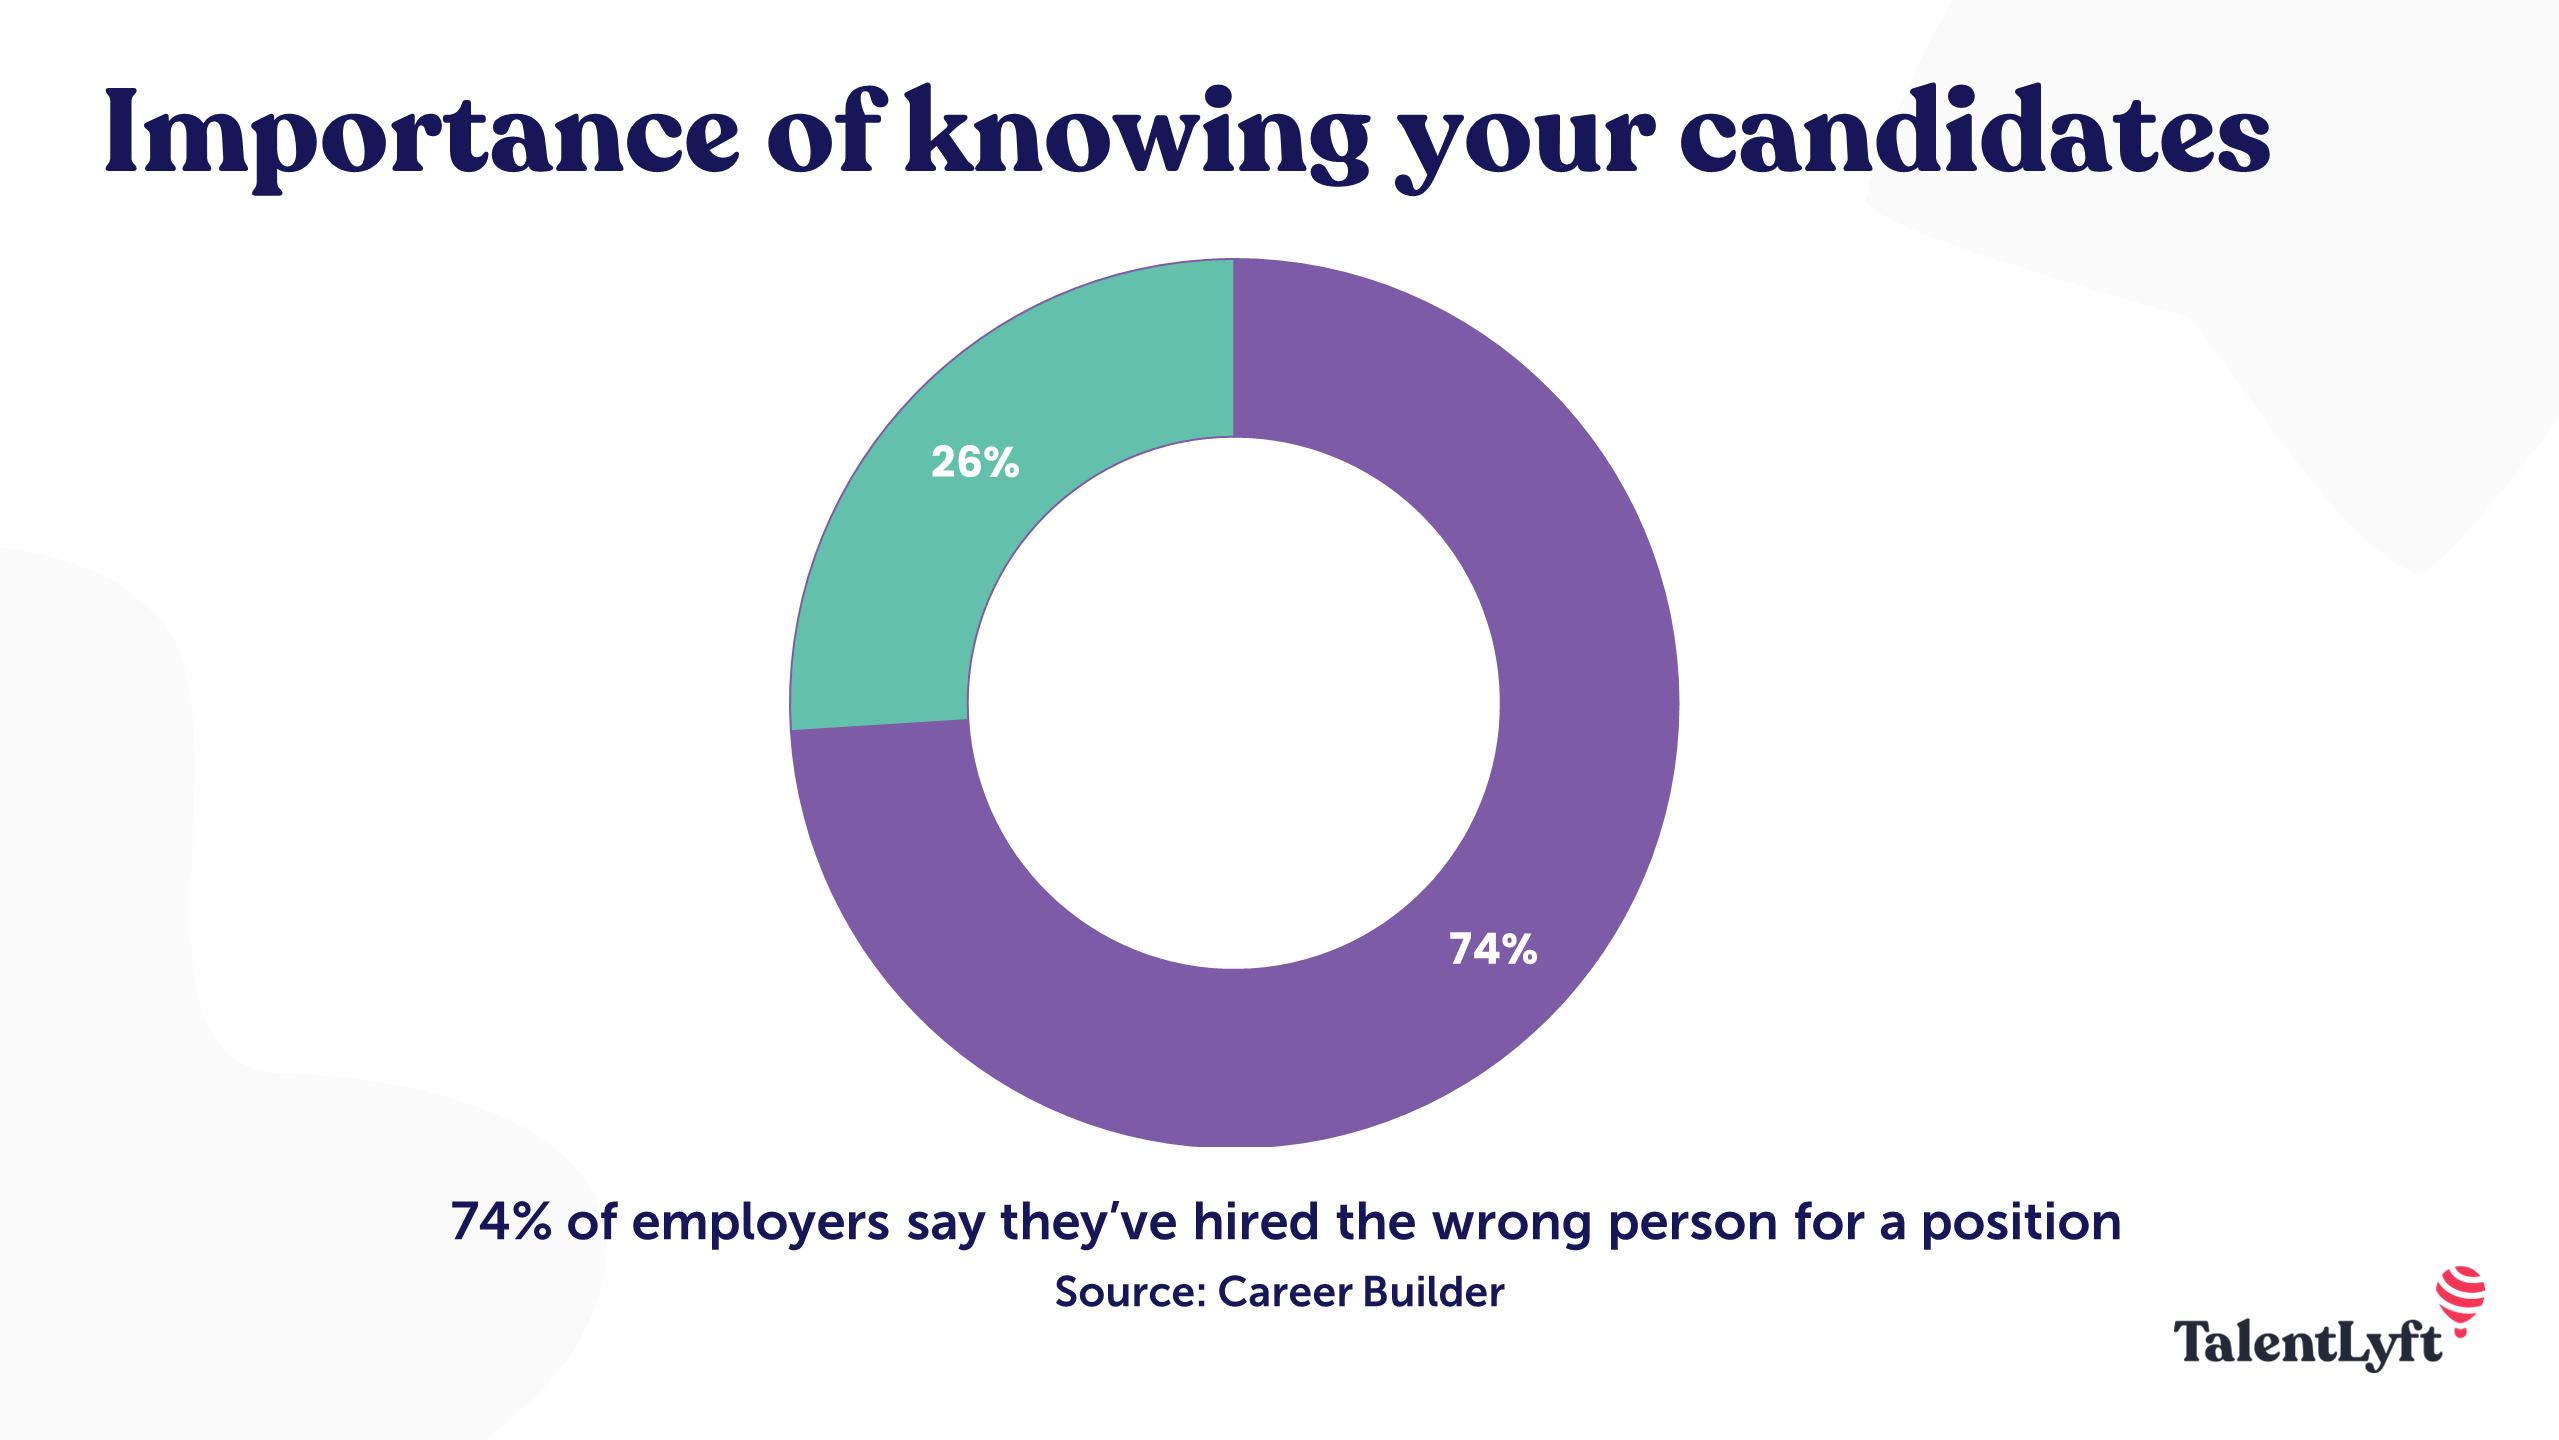 Why it is important to know your candidates